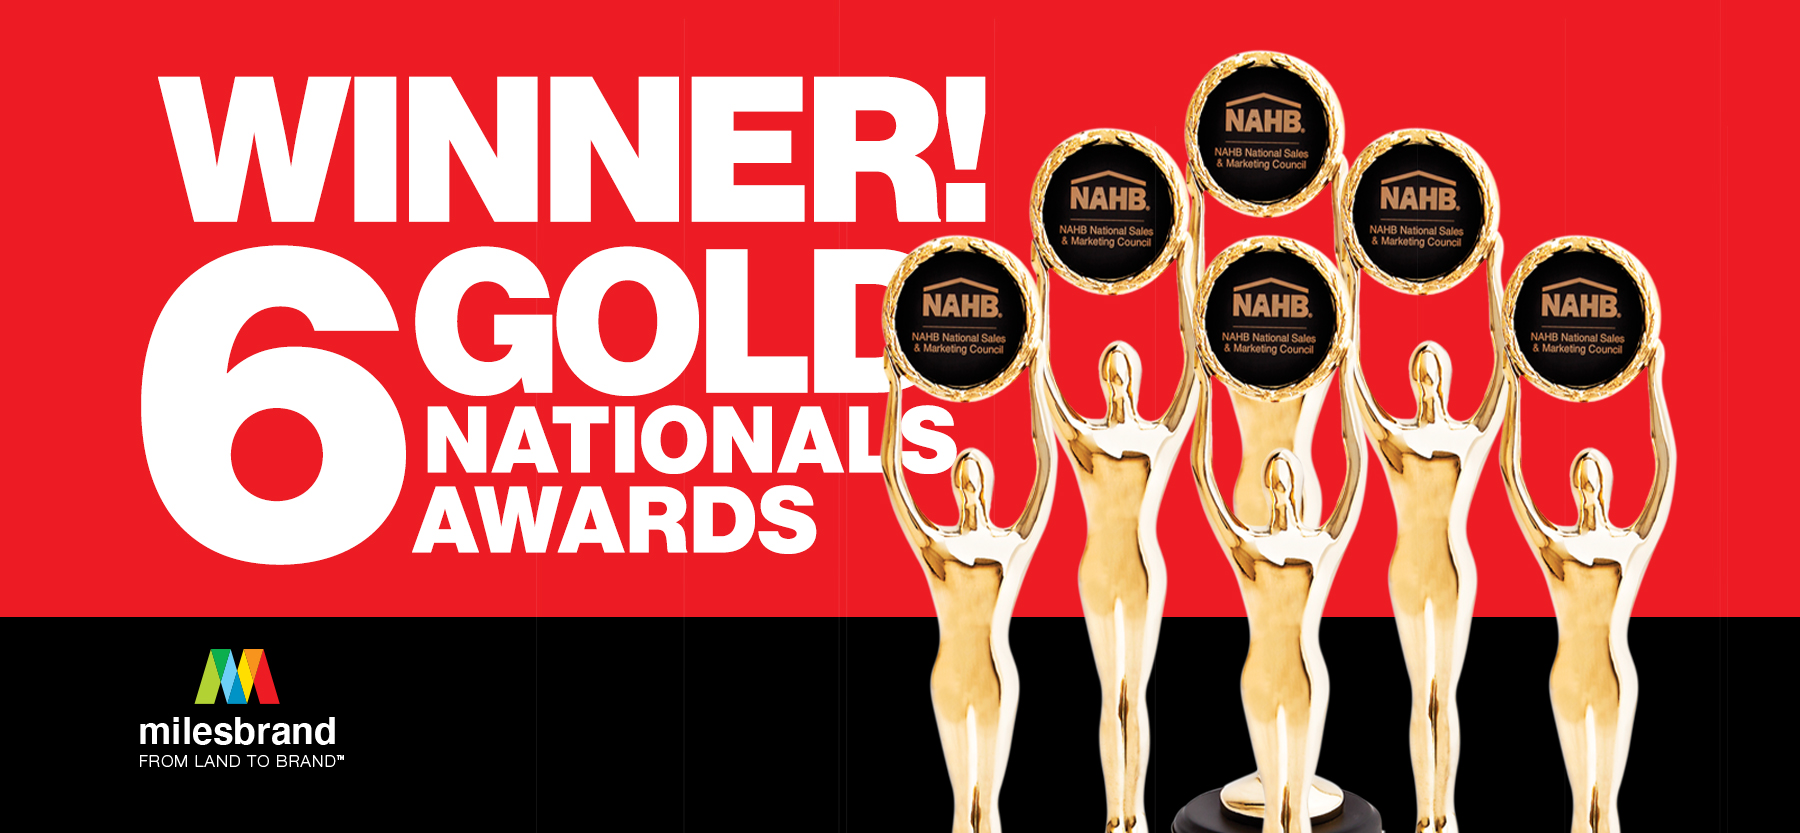 Milesbrand Brings Home Six Gold Nationals Awards for Real Estate and Home Builder Marketing